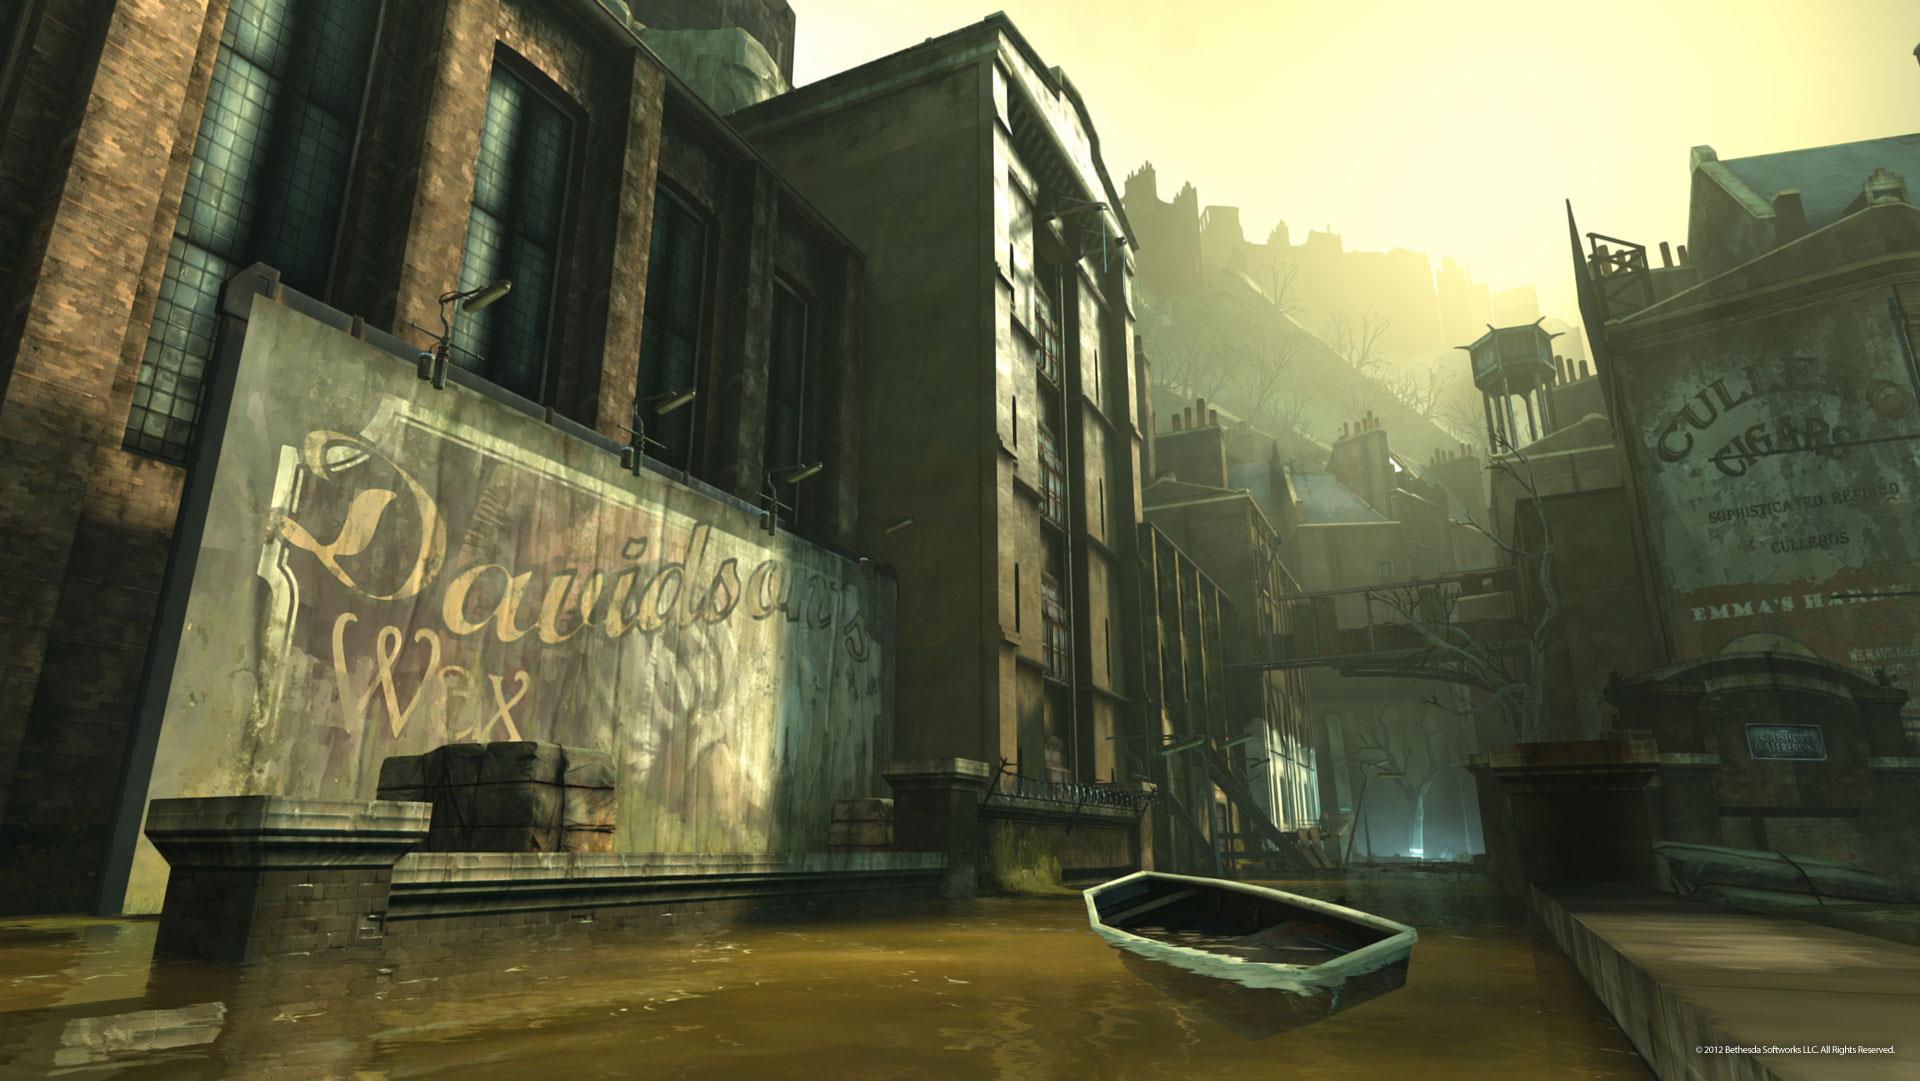 Media asset in full size related to 3dfxzone.it news item entitled as follows: Arkane Studios mostra nuovi screenshot del game Dishonored | Image Name: news17137_3.jpg